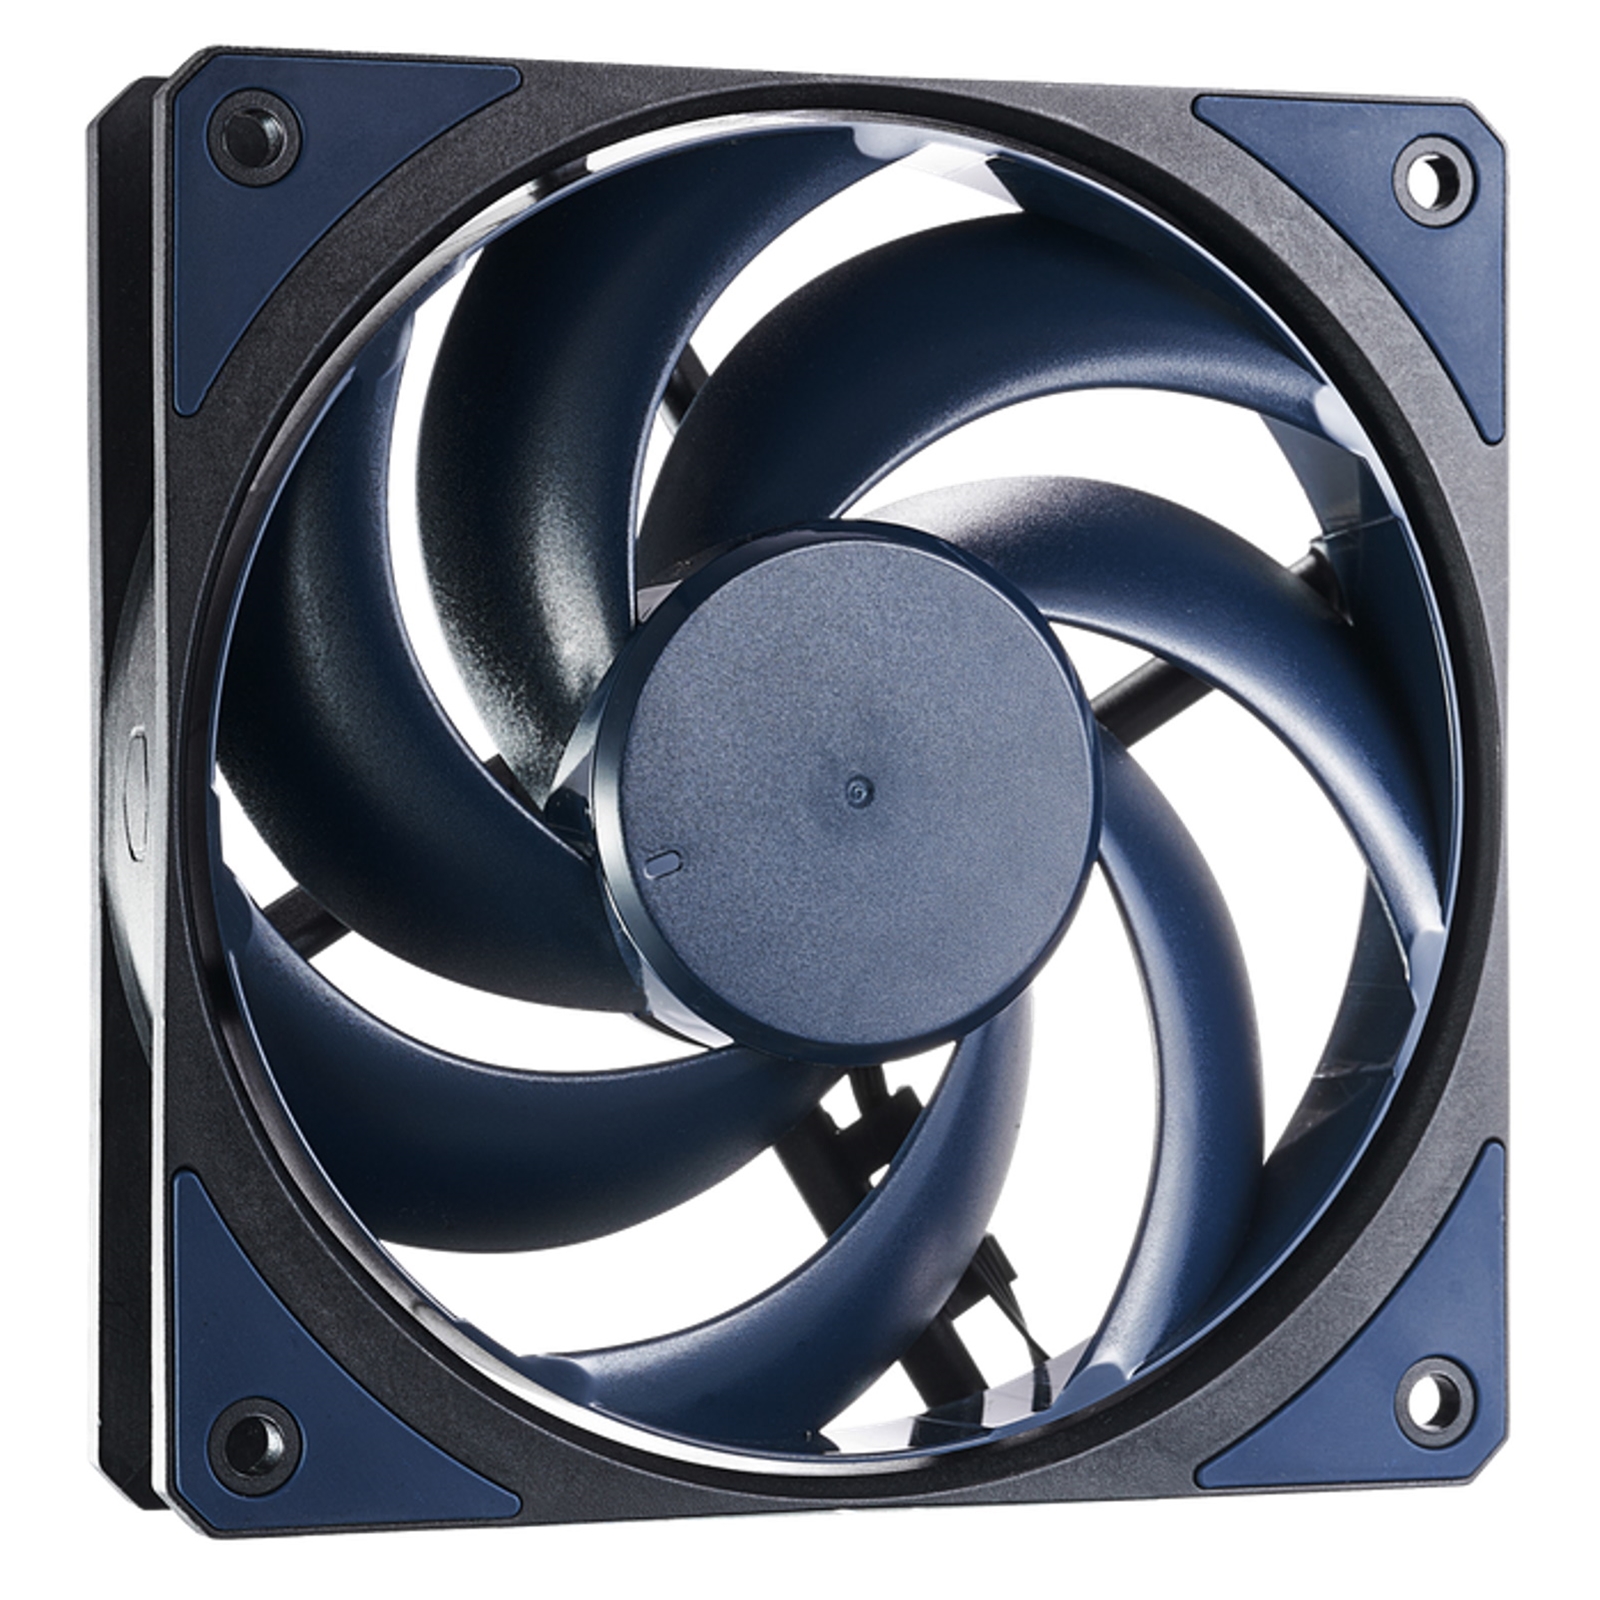 Cooler Master Mobius 120 Fan, 120mm, 2050RPM, 4-Pin PWM Connector, Interconnecting Ring Blade Design, Pressure Air Acceleration, Absolute Acoustics